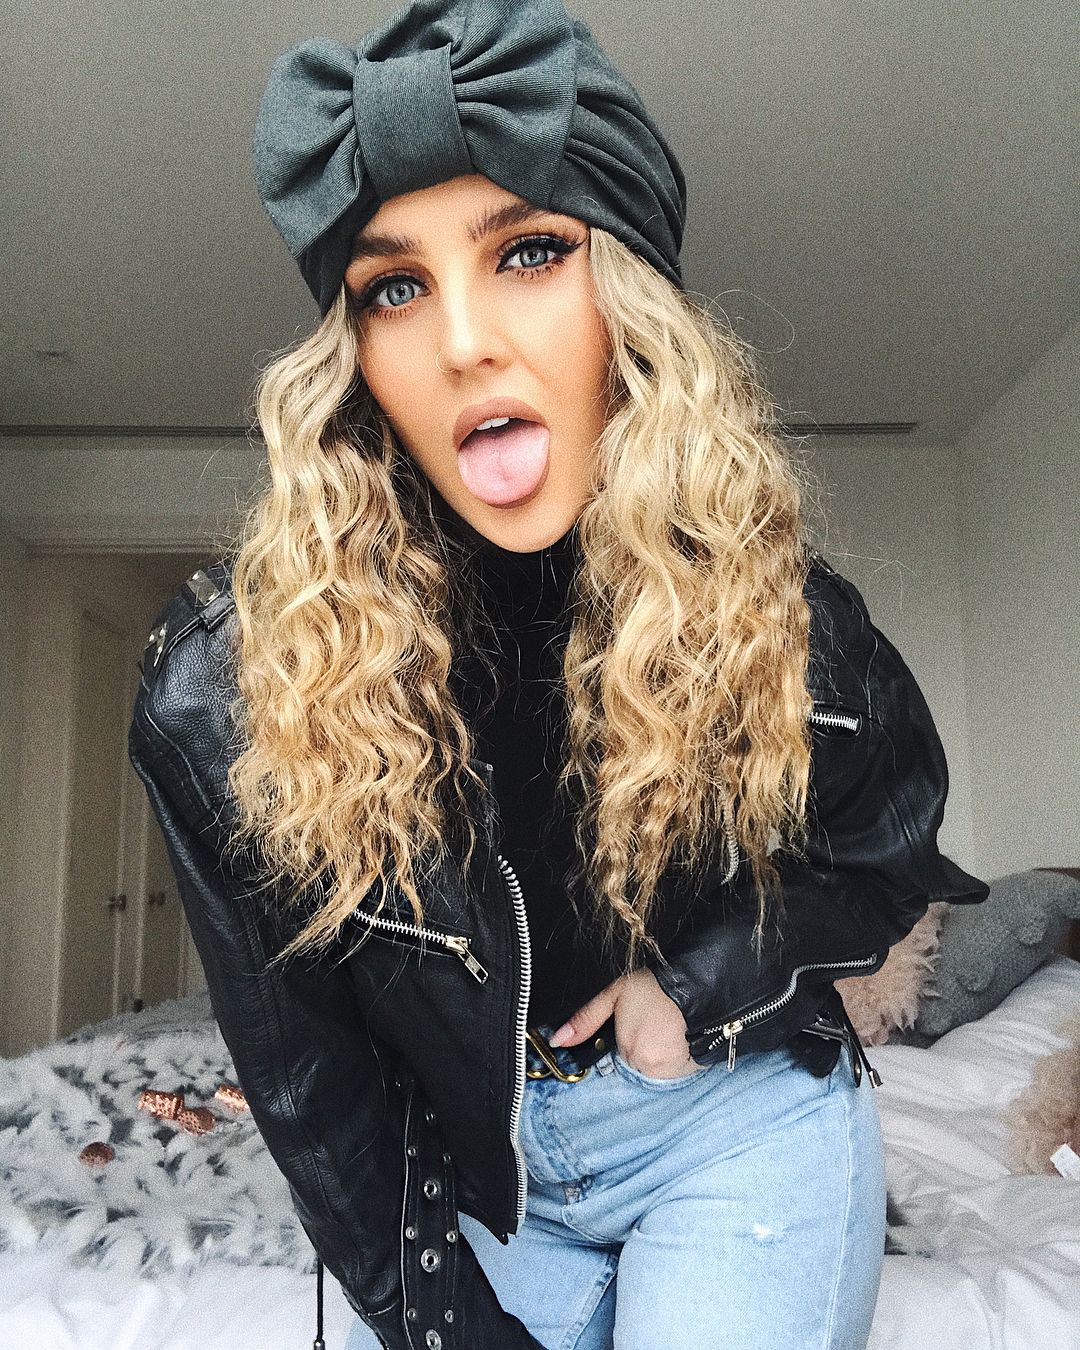 Perrie edwards 12 hottest pics, perrie edwards 12 instagram